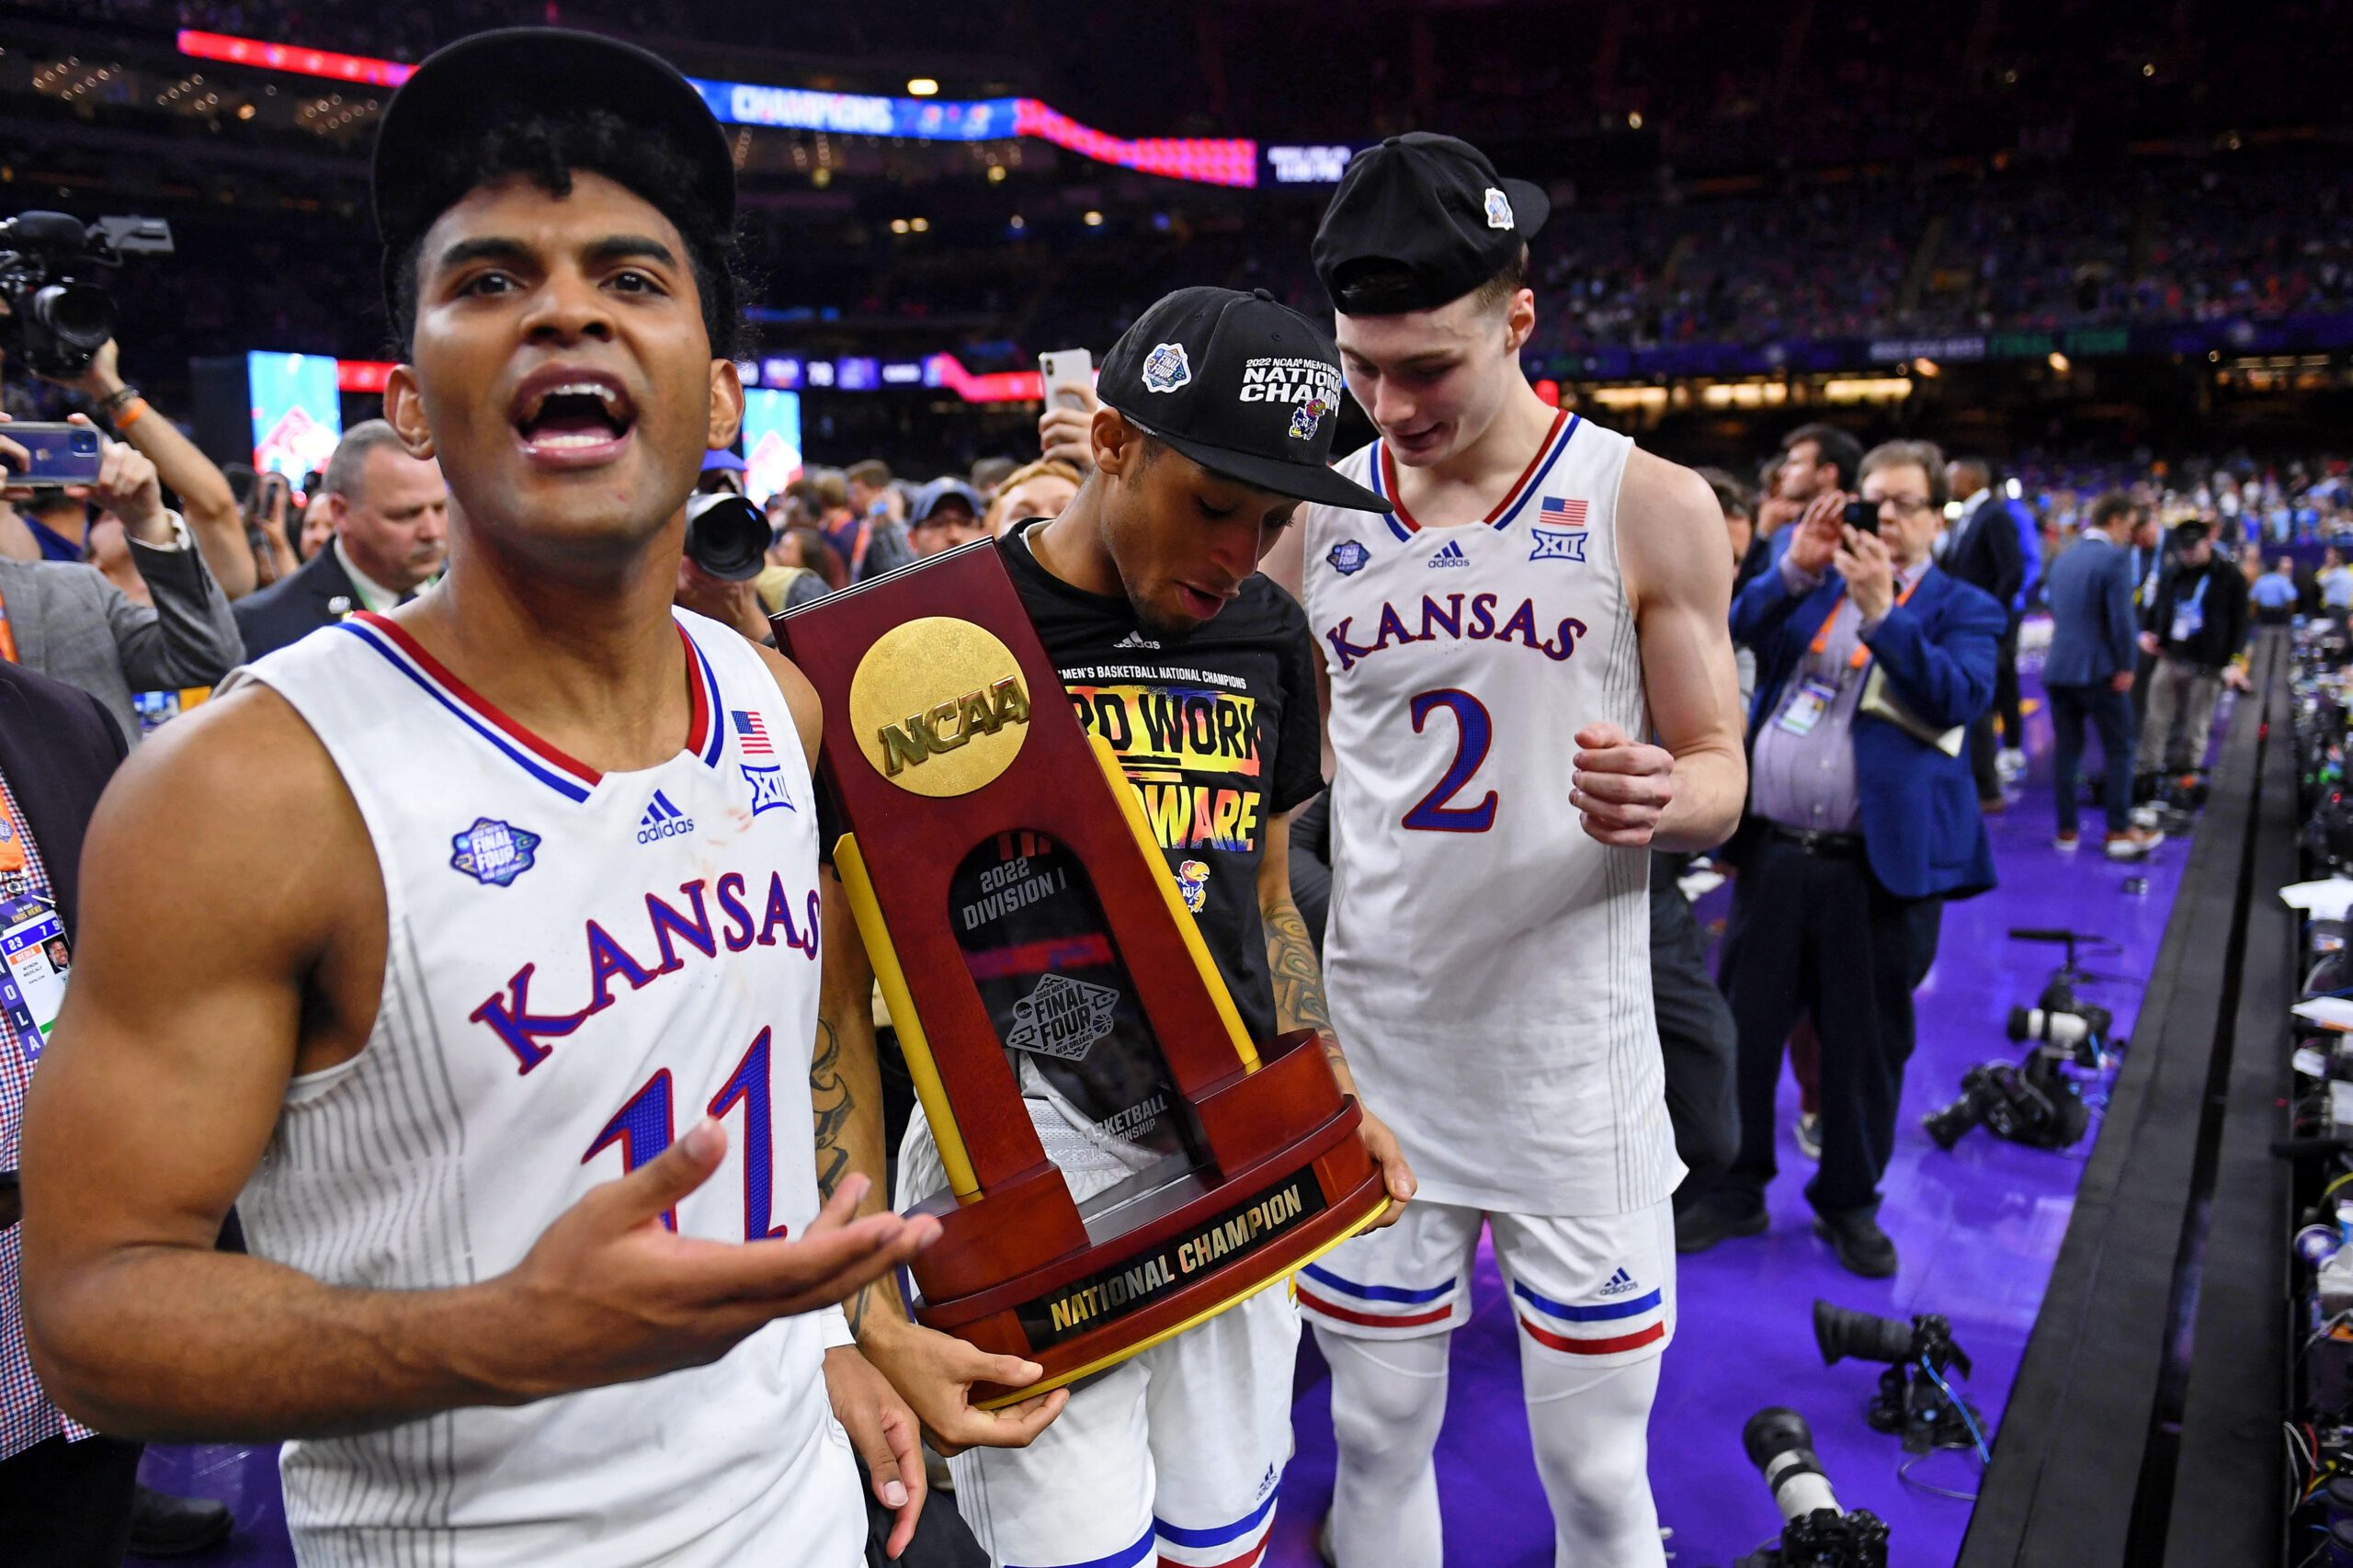 Remy Martin clutch as Kansas turns back North Carolina for US NCAA title